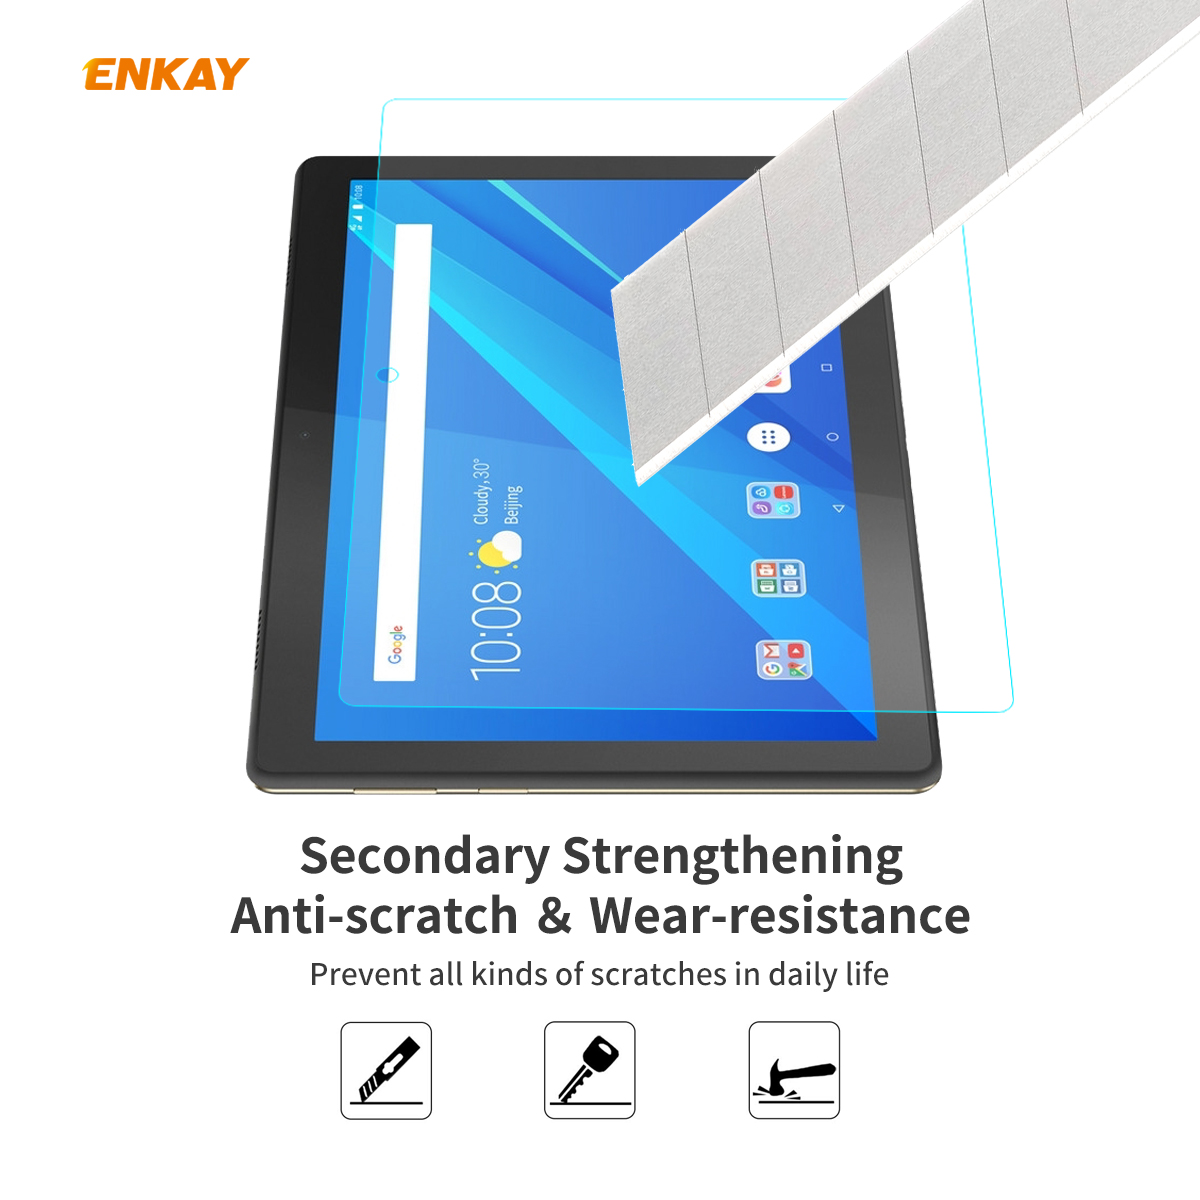 ENKAY-033mm-9H-25D-Curved-Edge-Tempered-Glass-Protective-Film-Screen-Protector-for-Lenovo-M10-Tablet-1734317-2